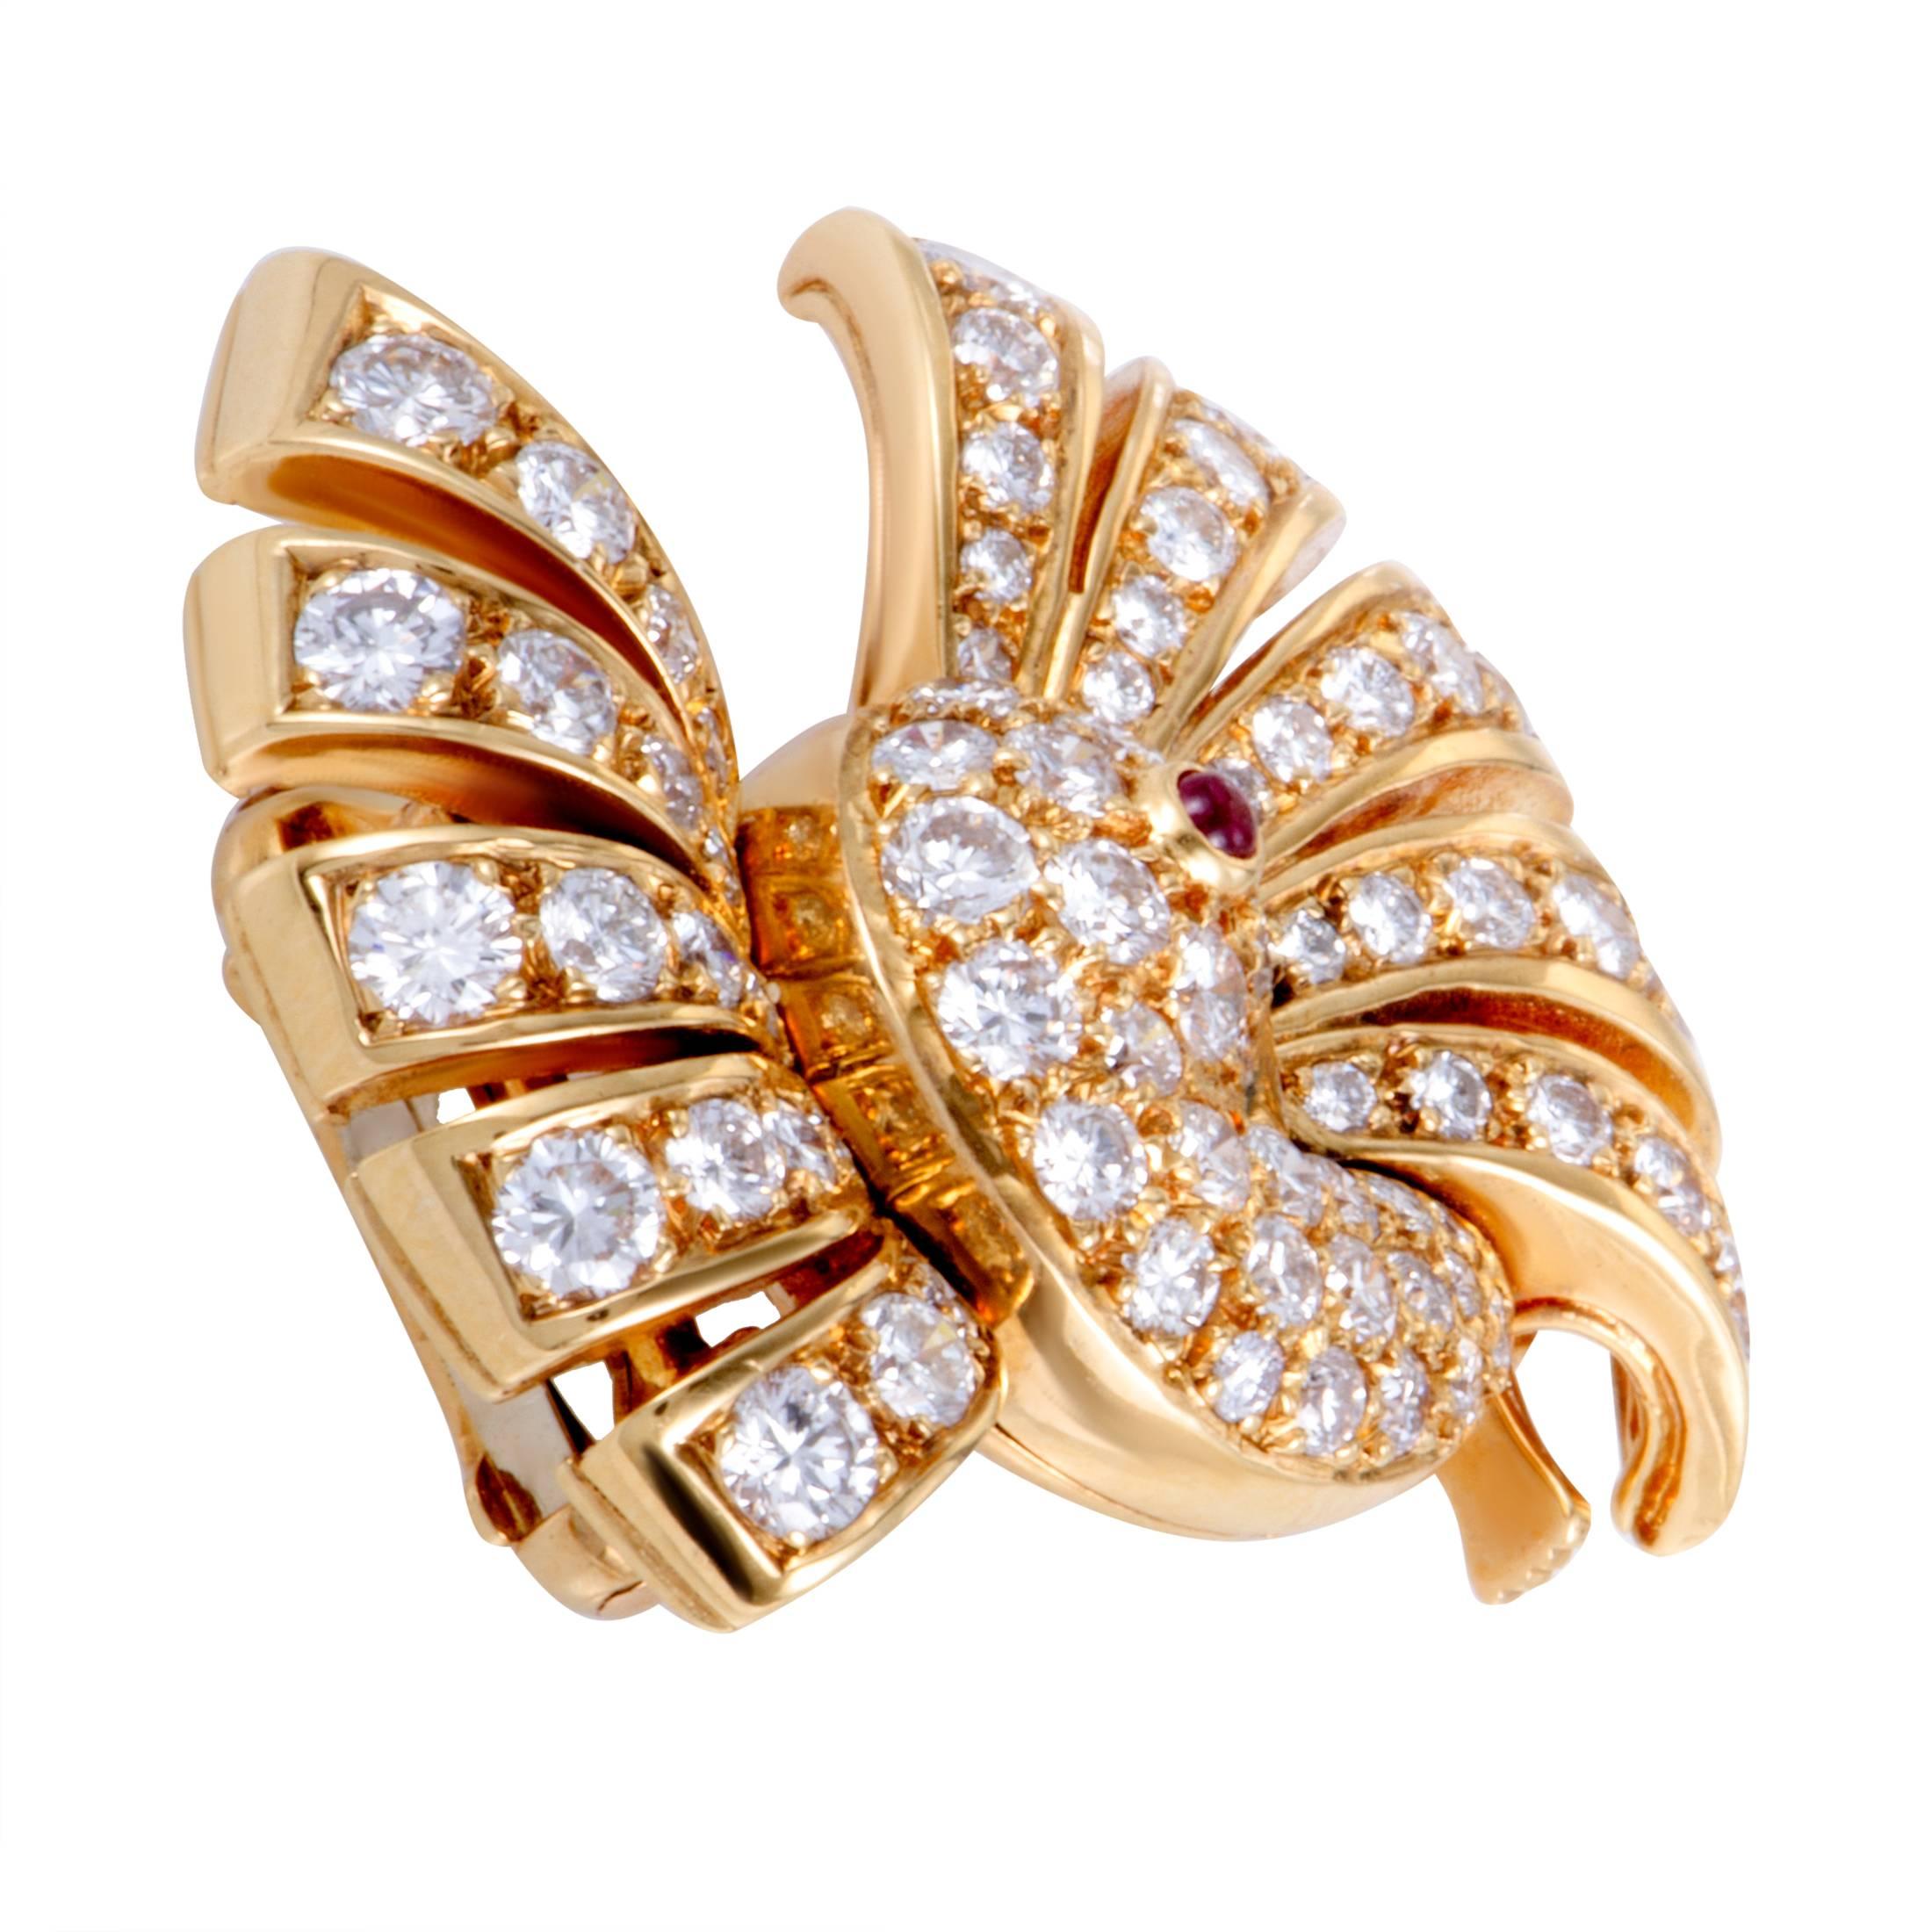 The attractive design of this splendid bird brooch by Van Cleef & Arpels boasts a nifty feel of prestigious elegance. The brooch is beautifully crafted in classy 18K yellow gold and gorgeously decorated with 2.50ct of sparkling diamonds around a